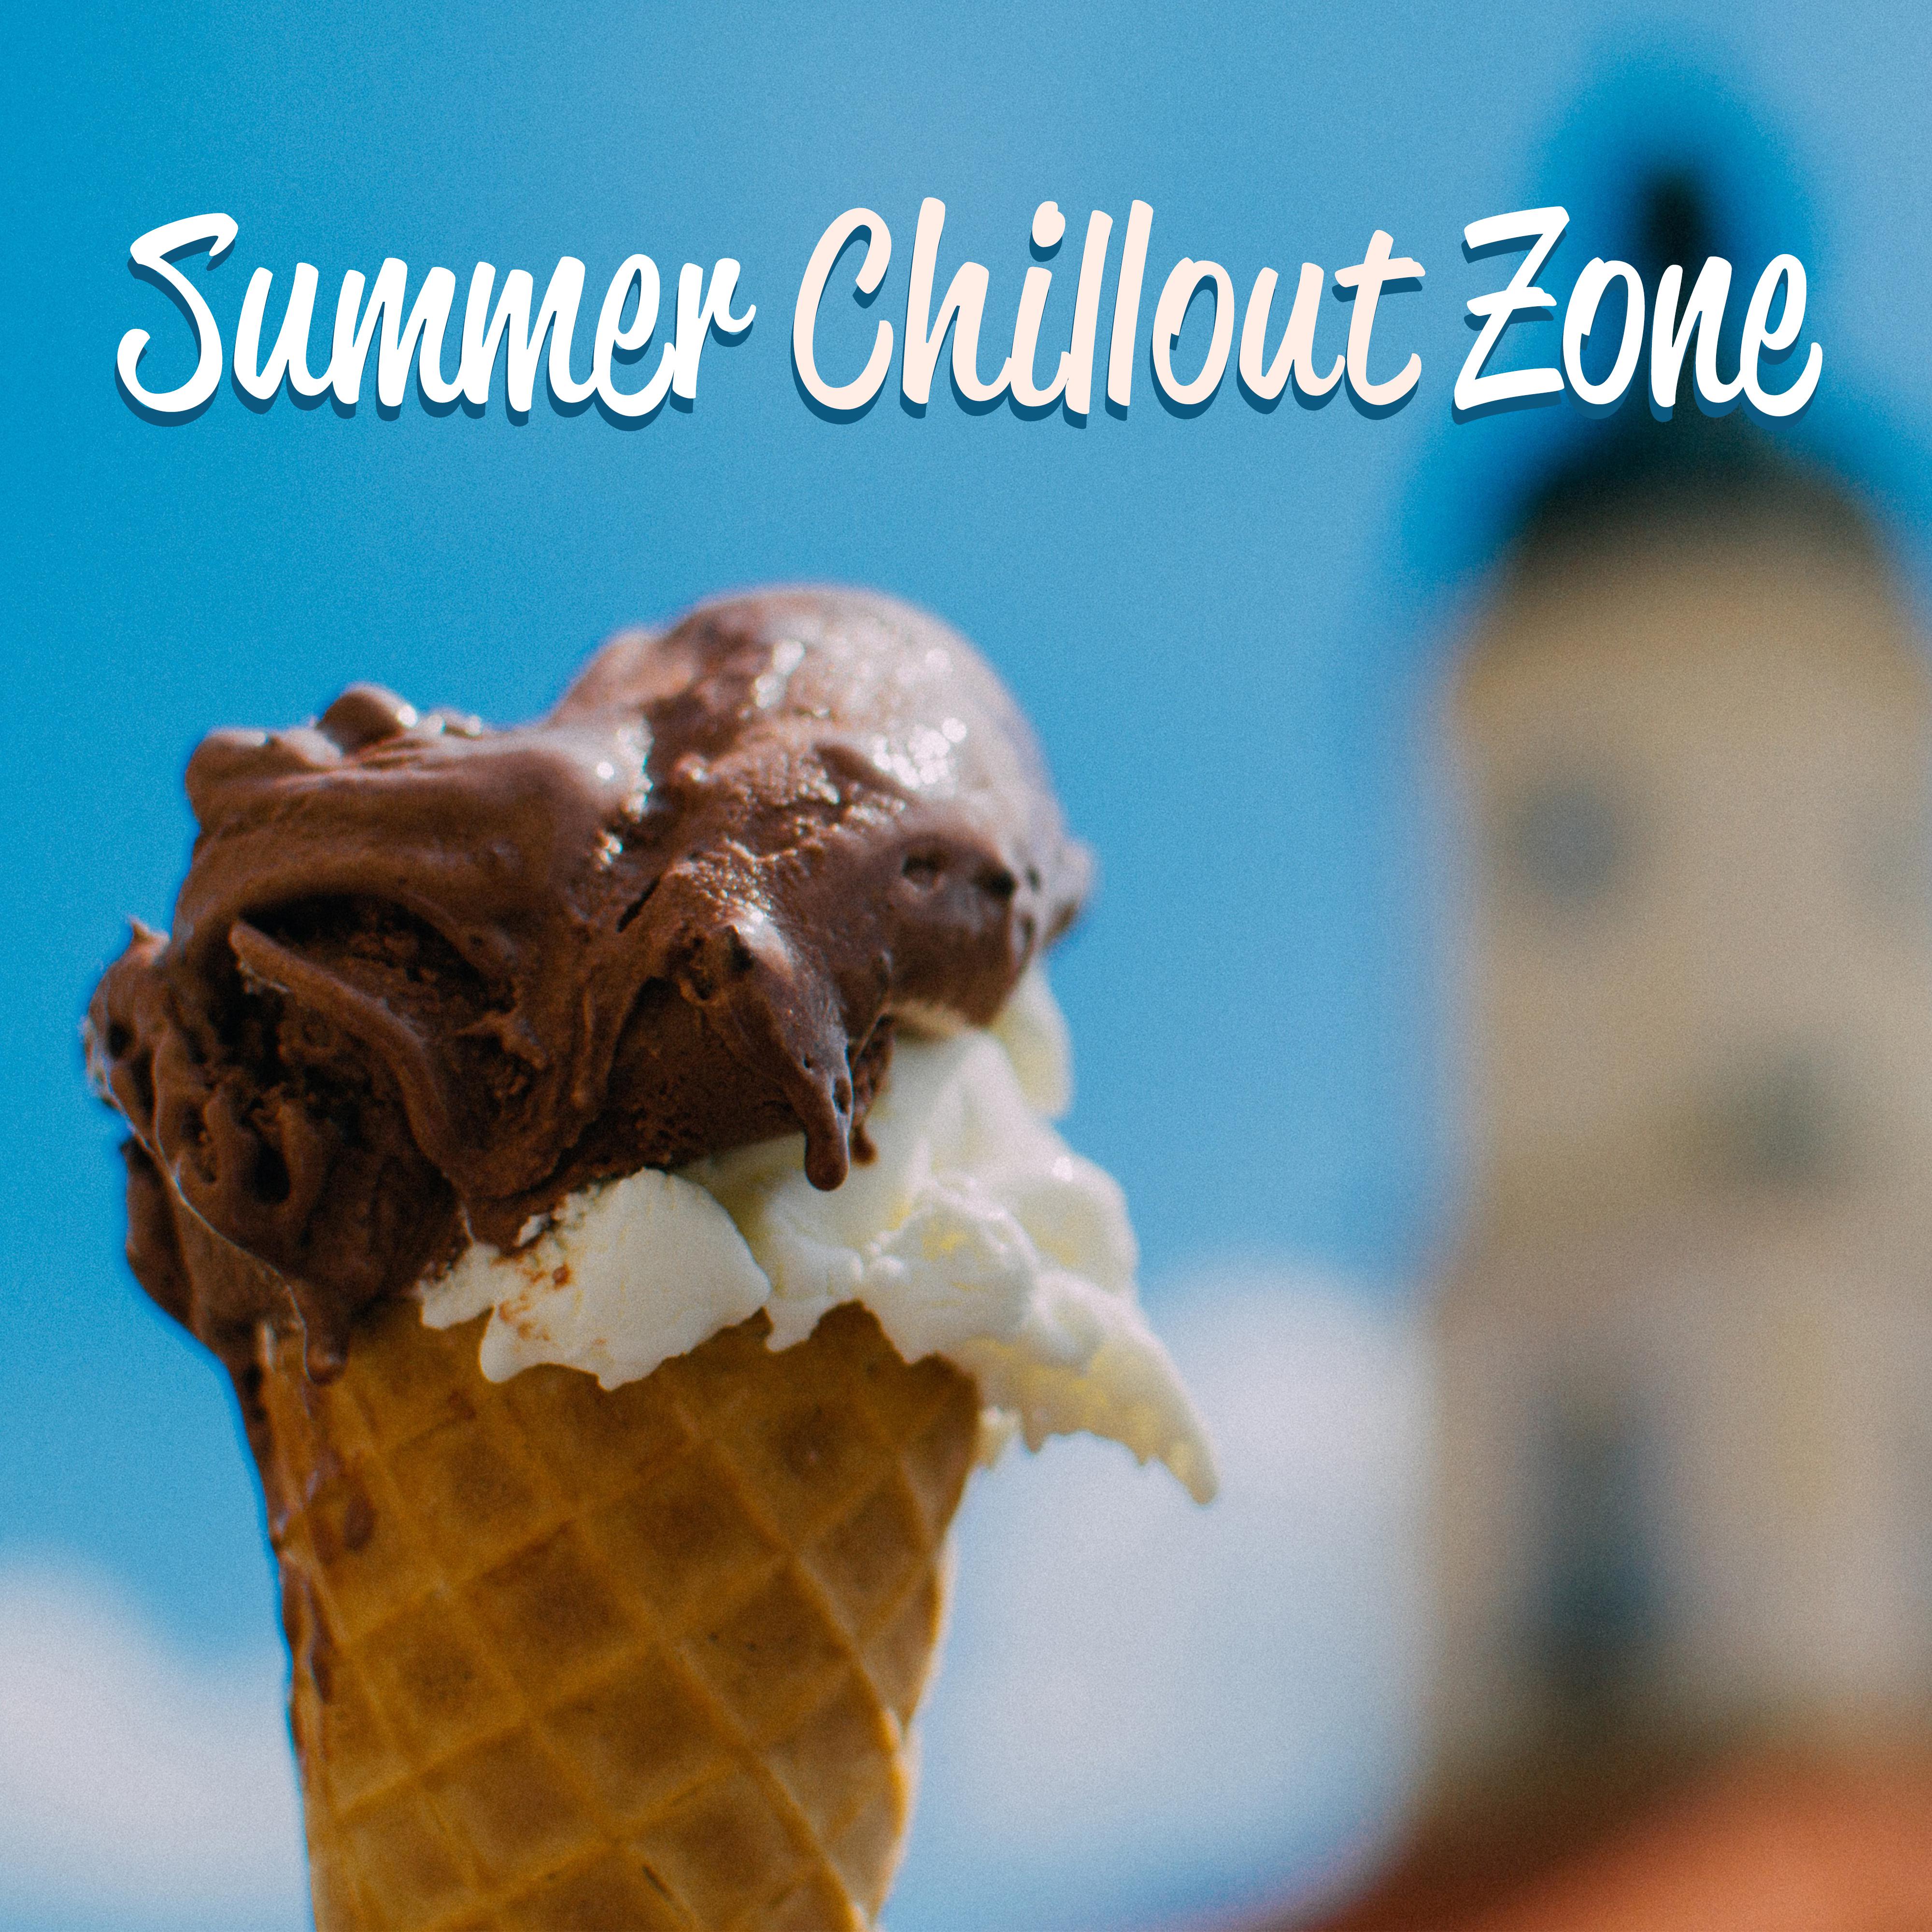 Summer Chillout Zone